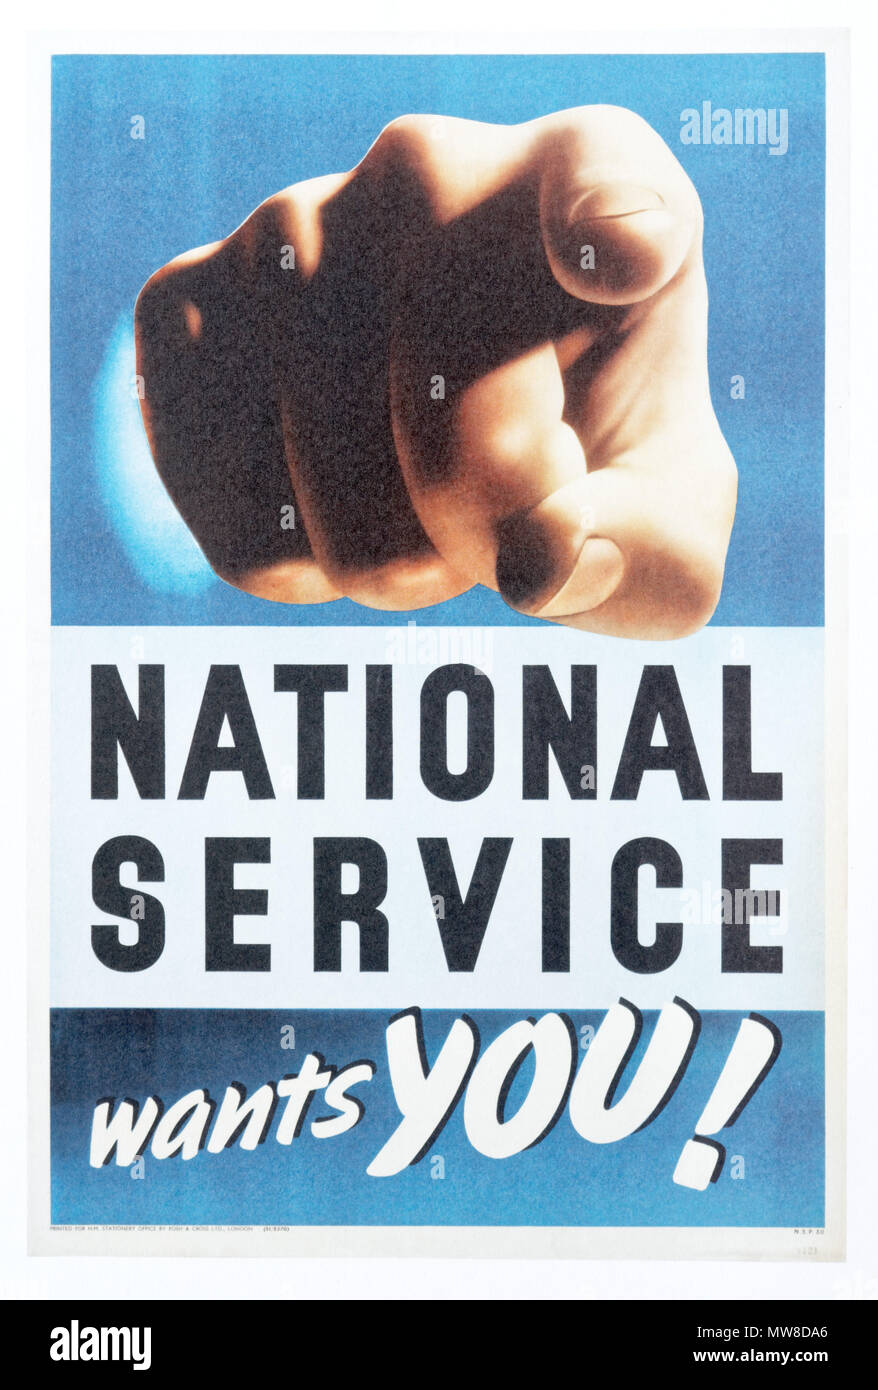 A second world war poster saying National Service Wants You, calling young men to compulsory military of industrial service. Stock Photo